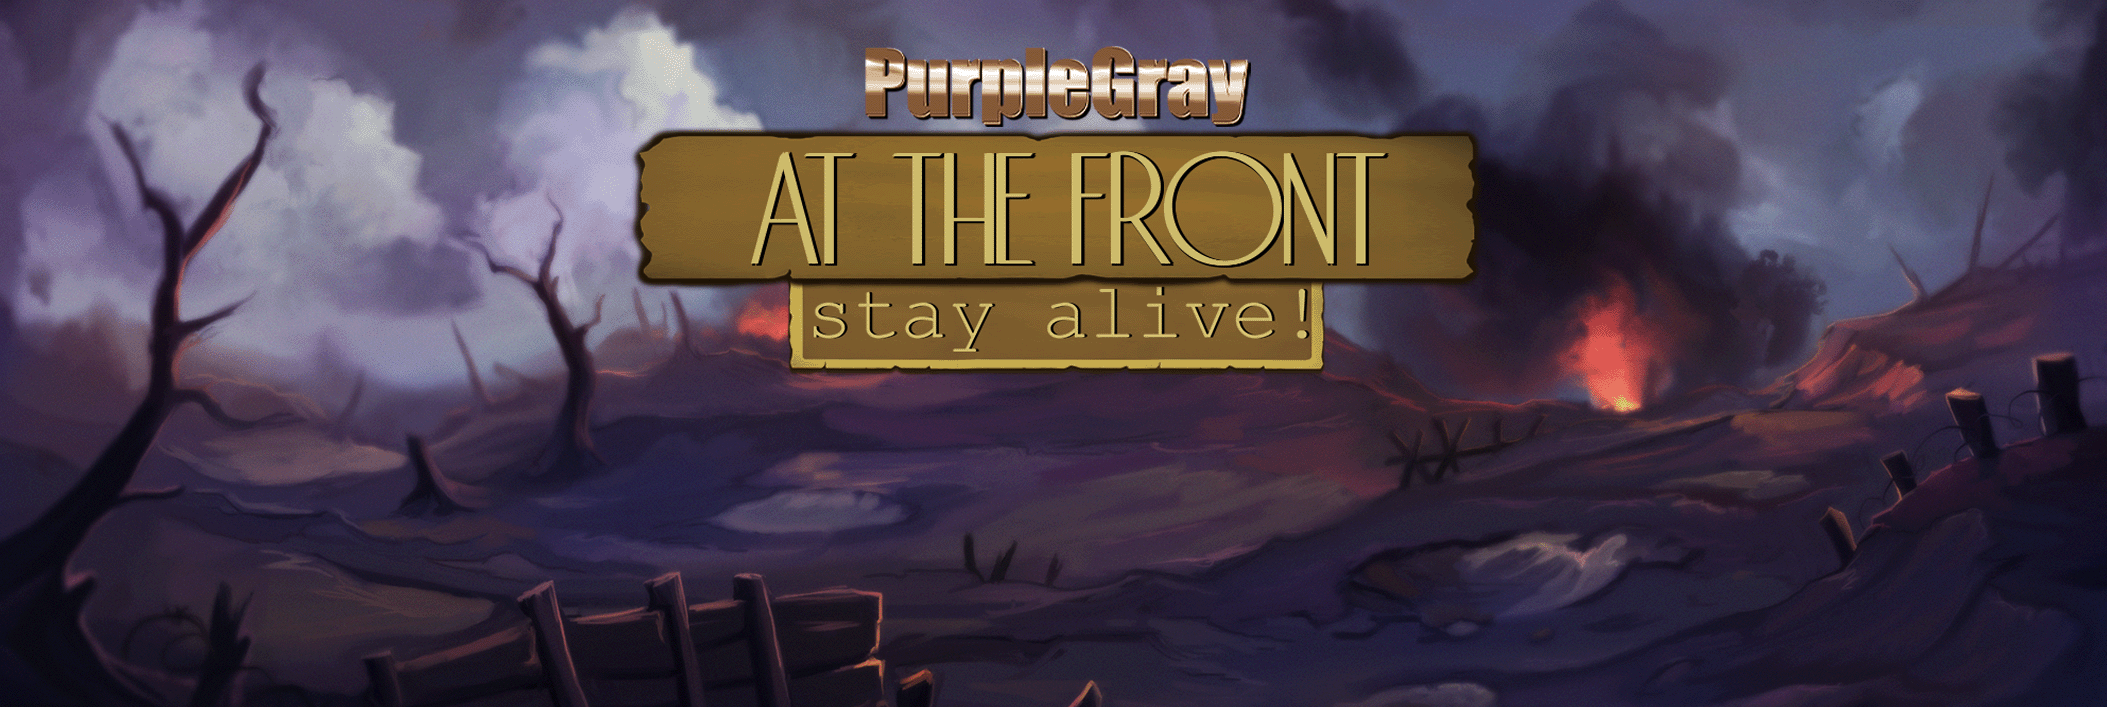 At the front: Stay alive!